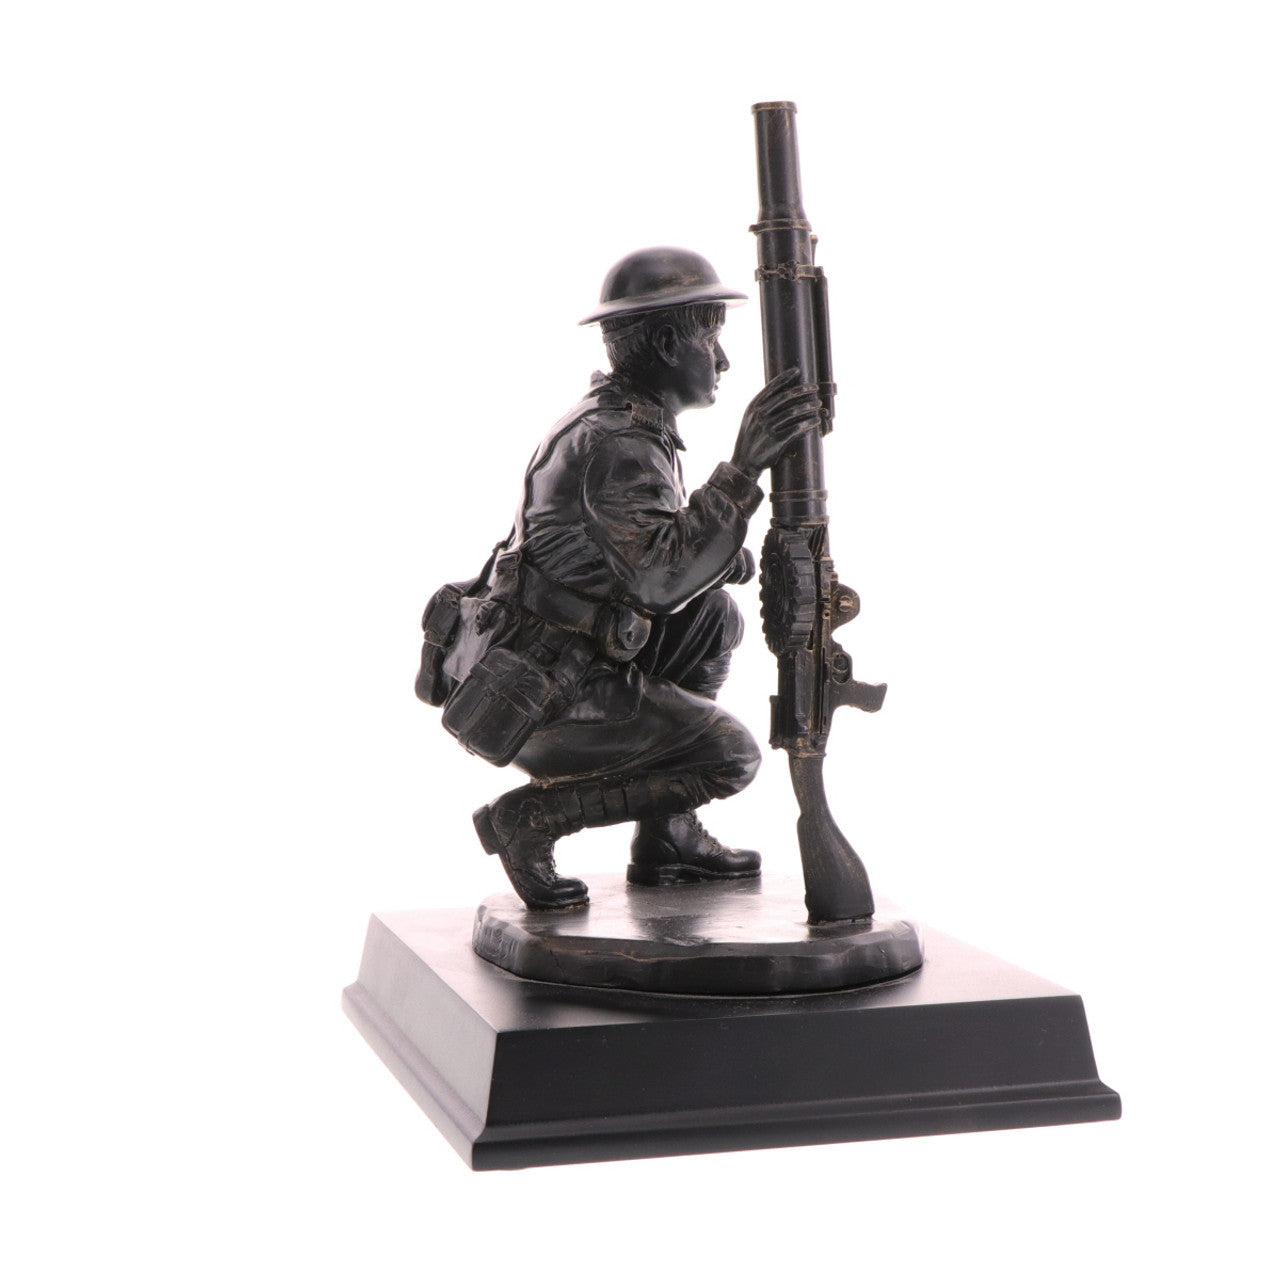 The limited edition Australian Machine Gun Company figurine is a true piece of military history. In 1916, the Australian Imperial Forces revolutionized infantry tactics with the adoption of the lighter air-cooled Lewis Gun. www.defenceqstore.com.au